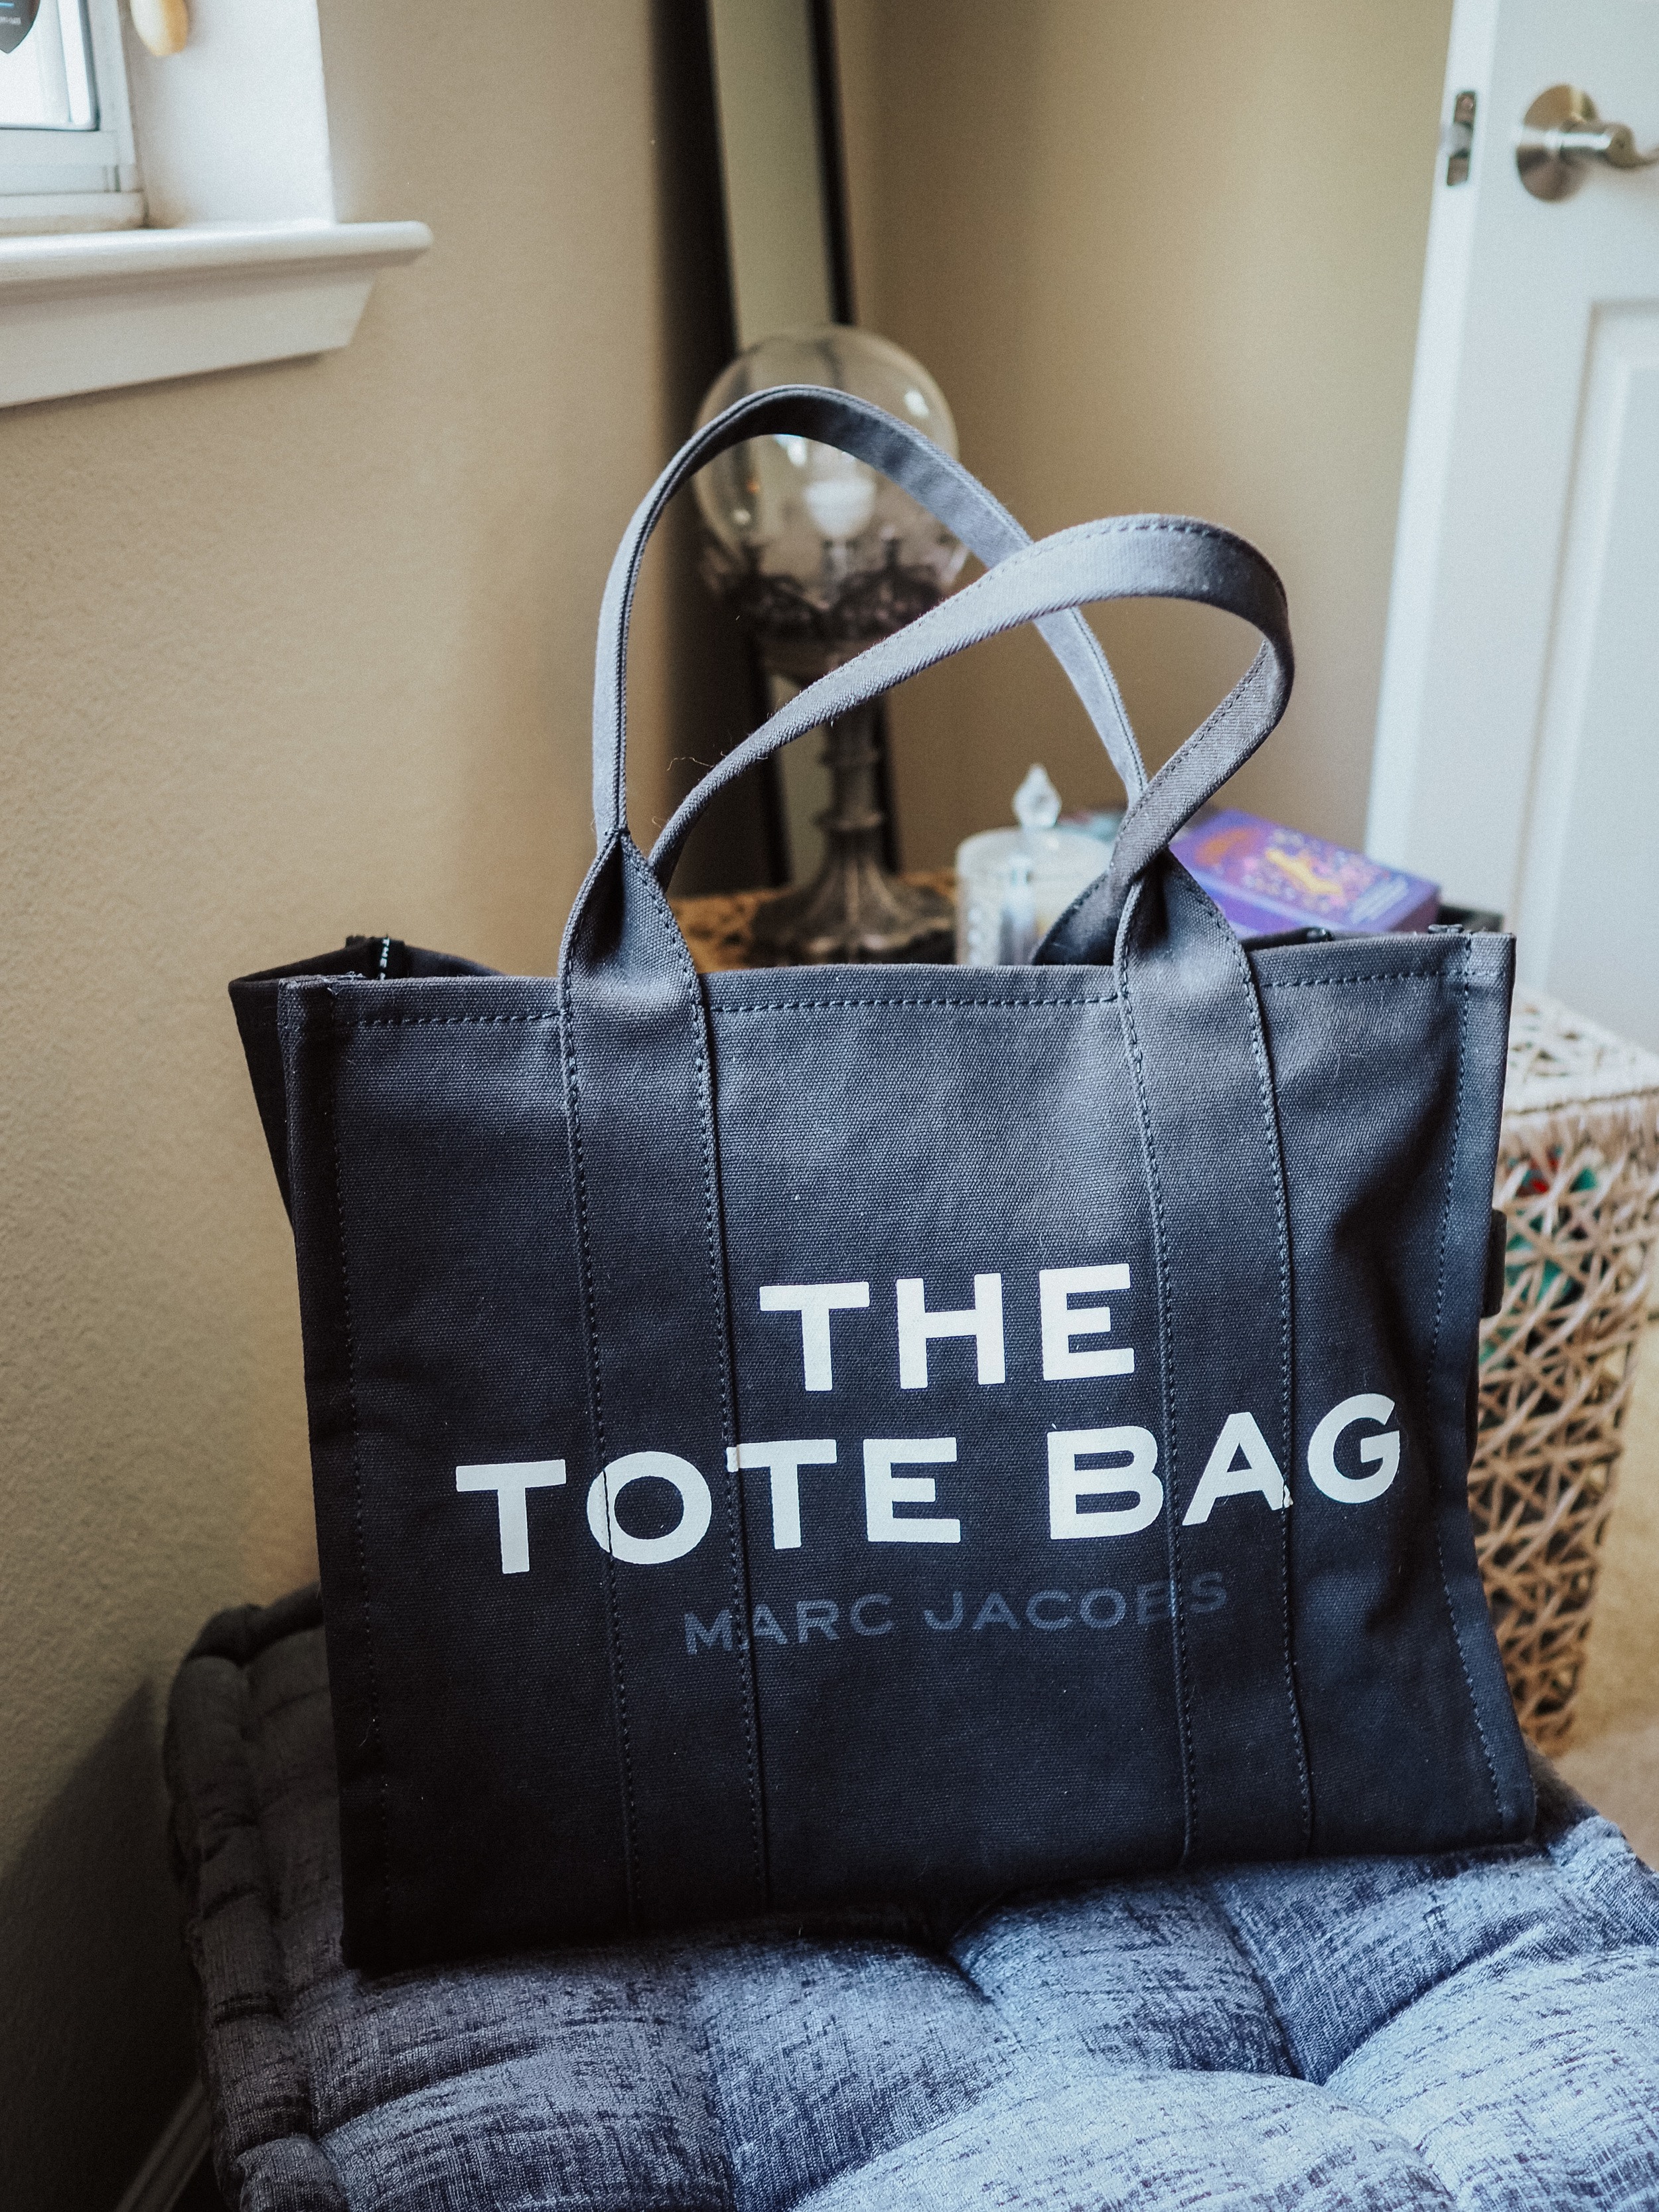 The Best Dior Book Tote Dupe - by Kelsey Boyanzhu